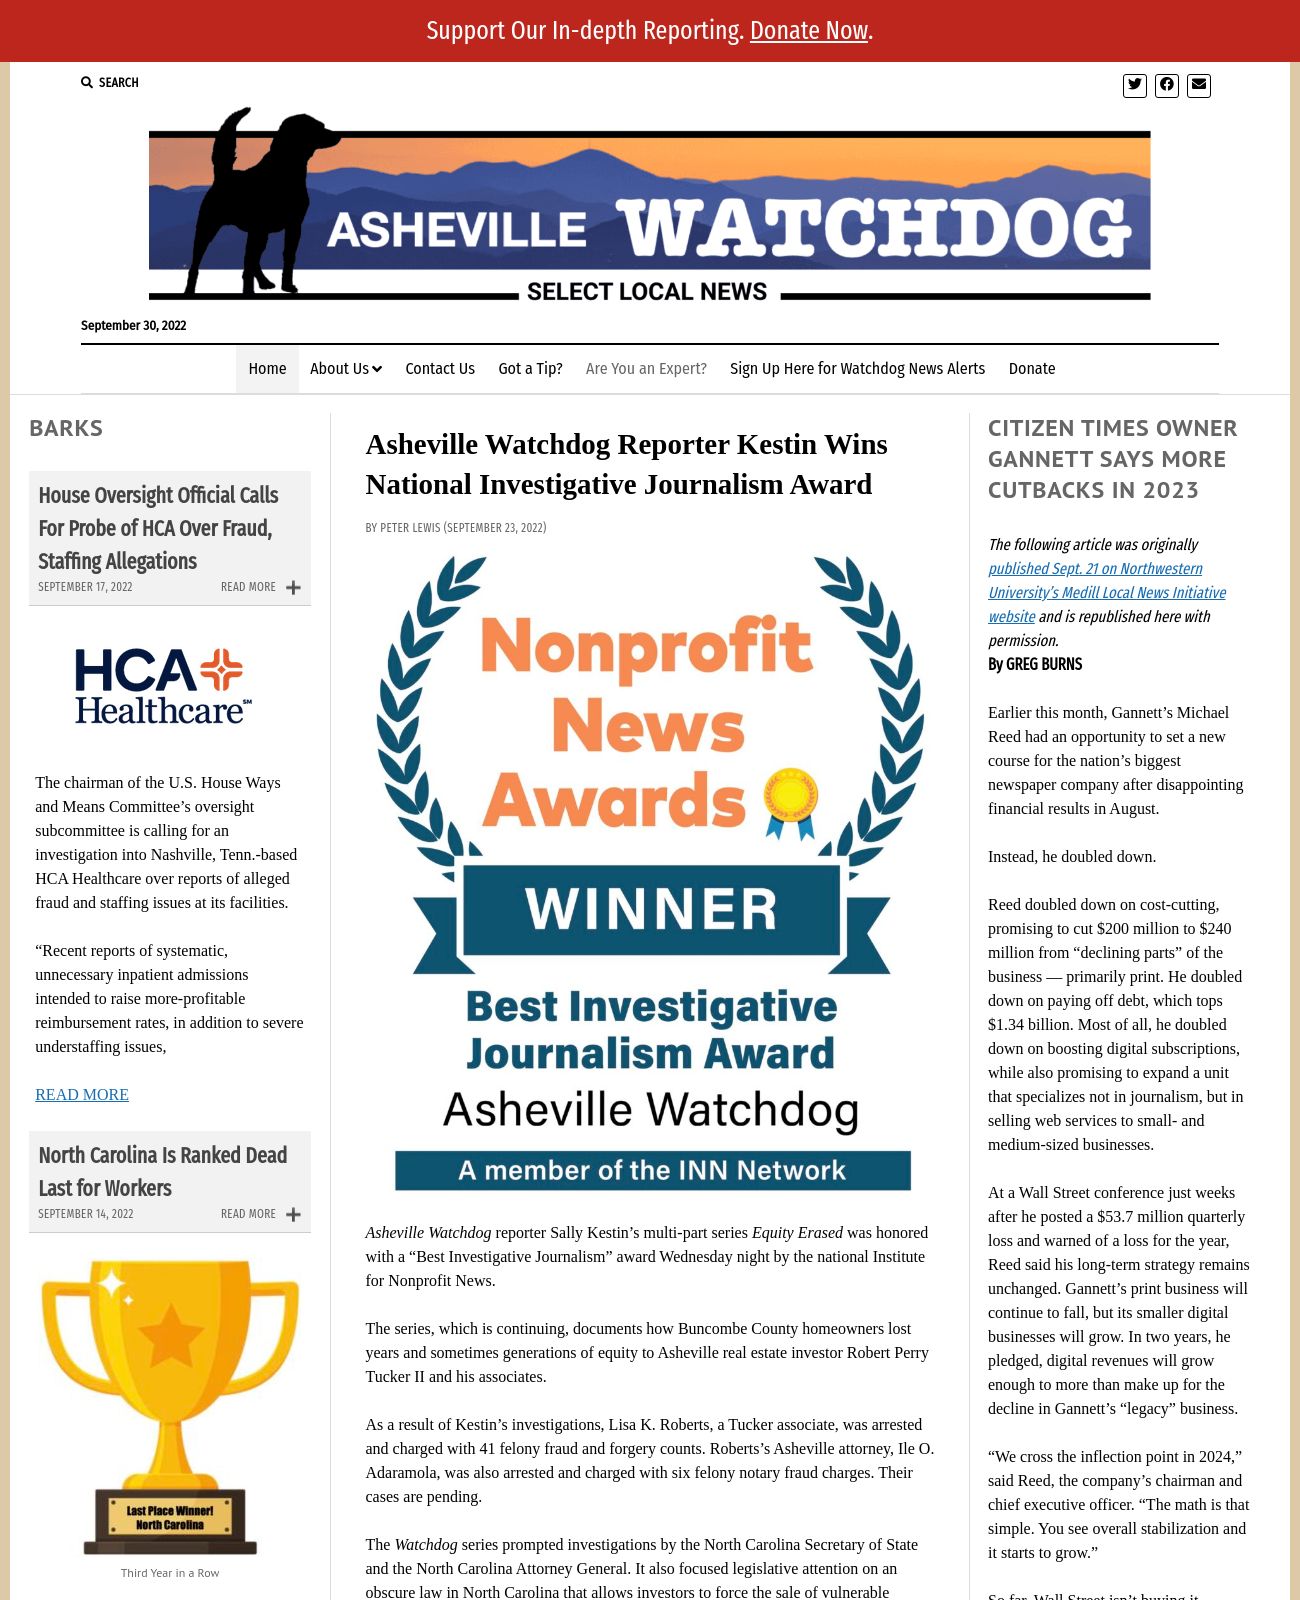 Asheville Watchdog at 2022-09-30 19:03:02-04:00 local time